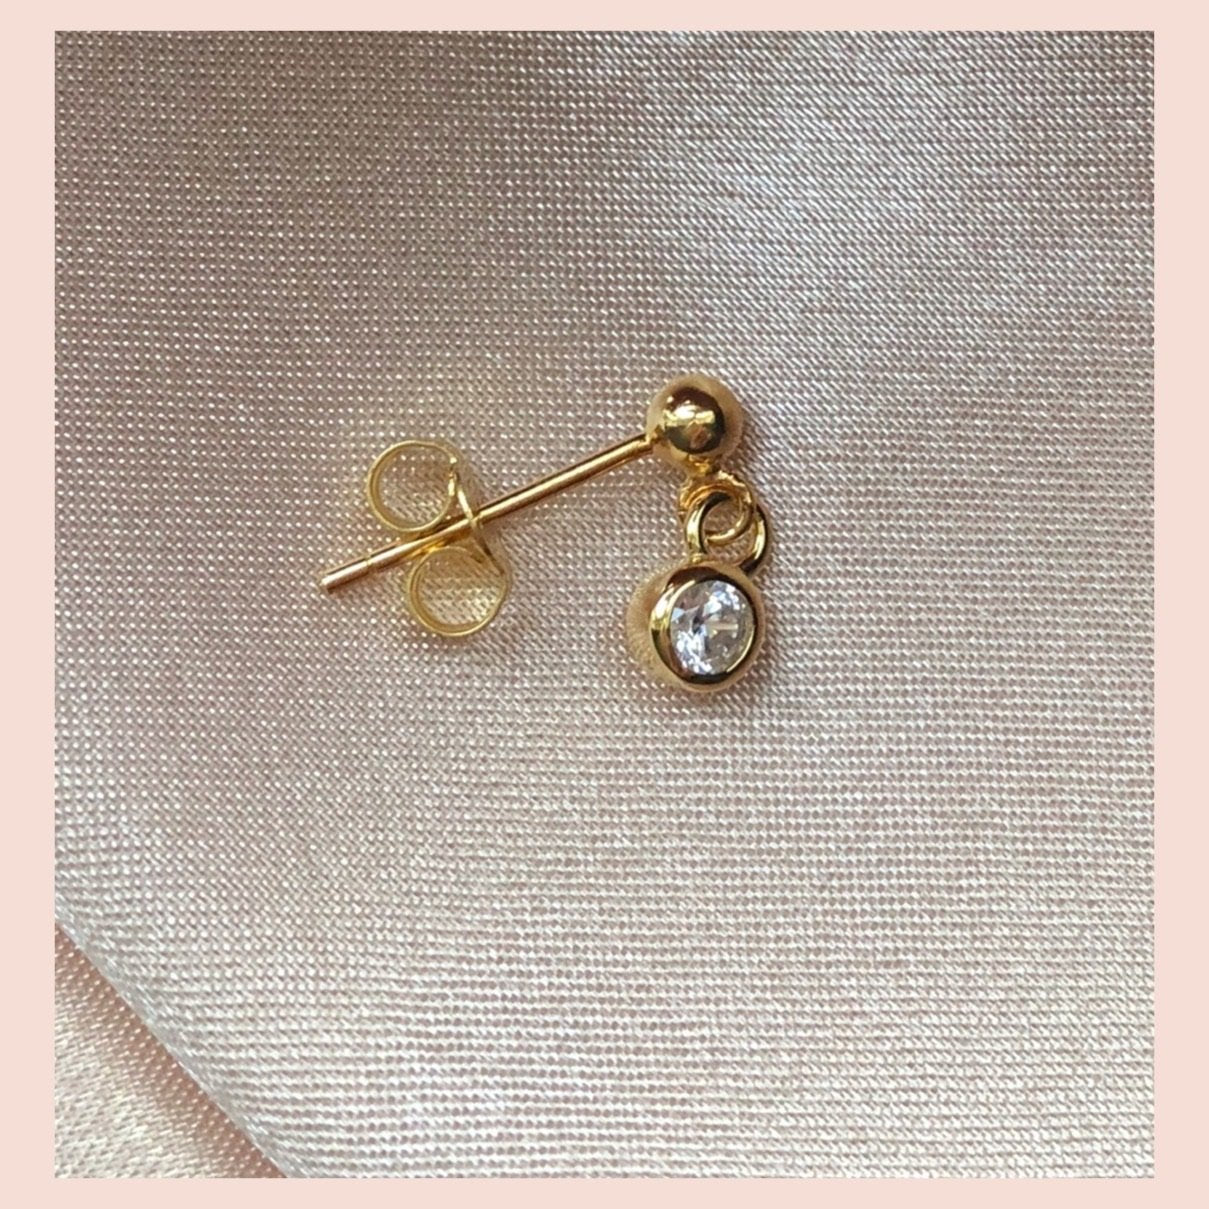 Crystal Stud Earring -  Gold Plated Silver  Cubic zirconia